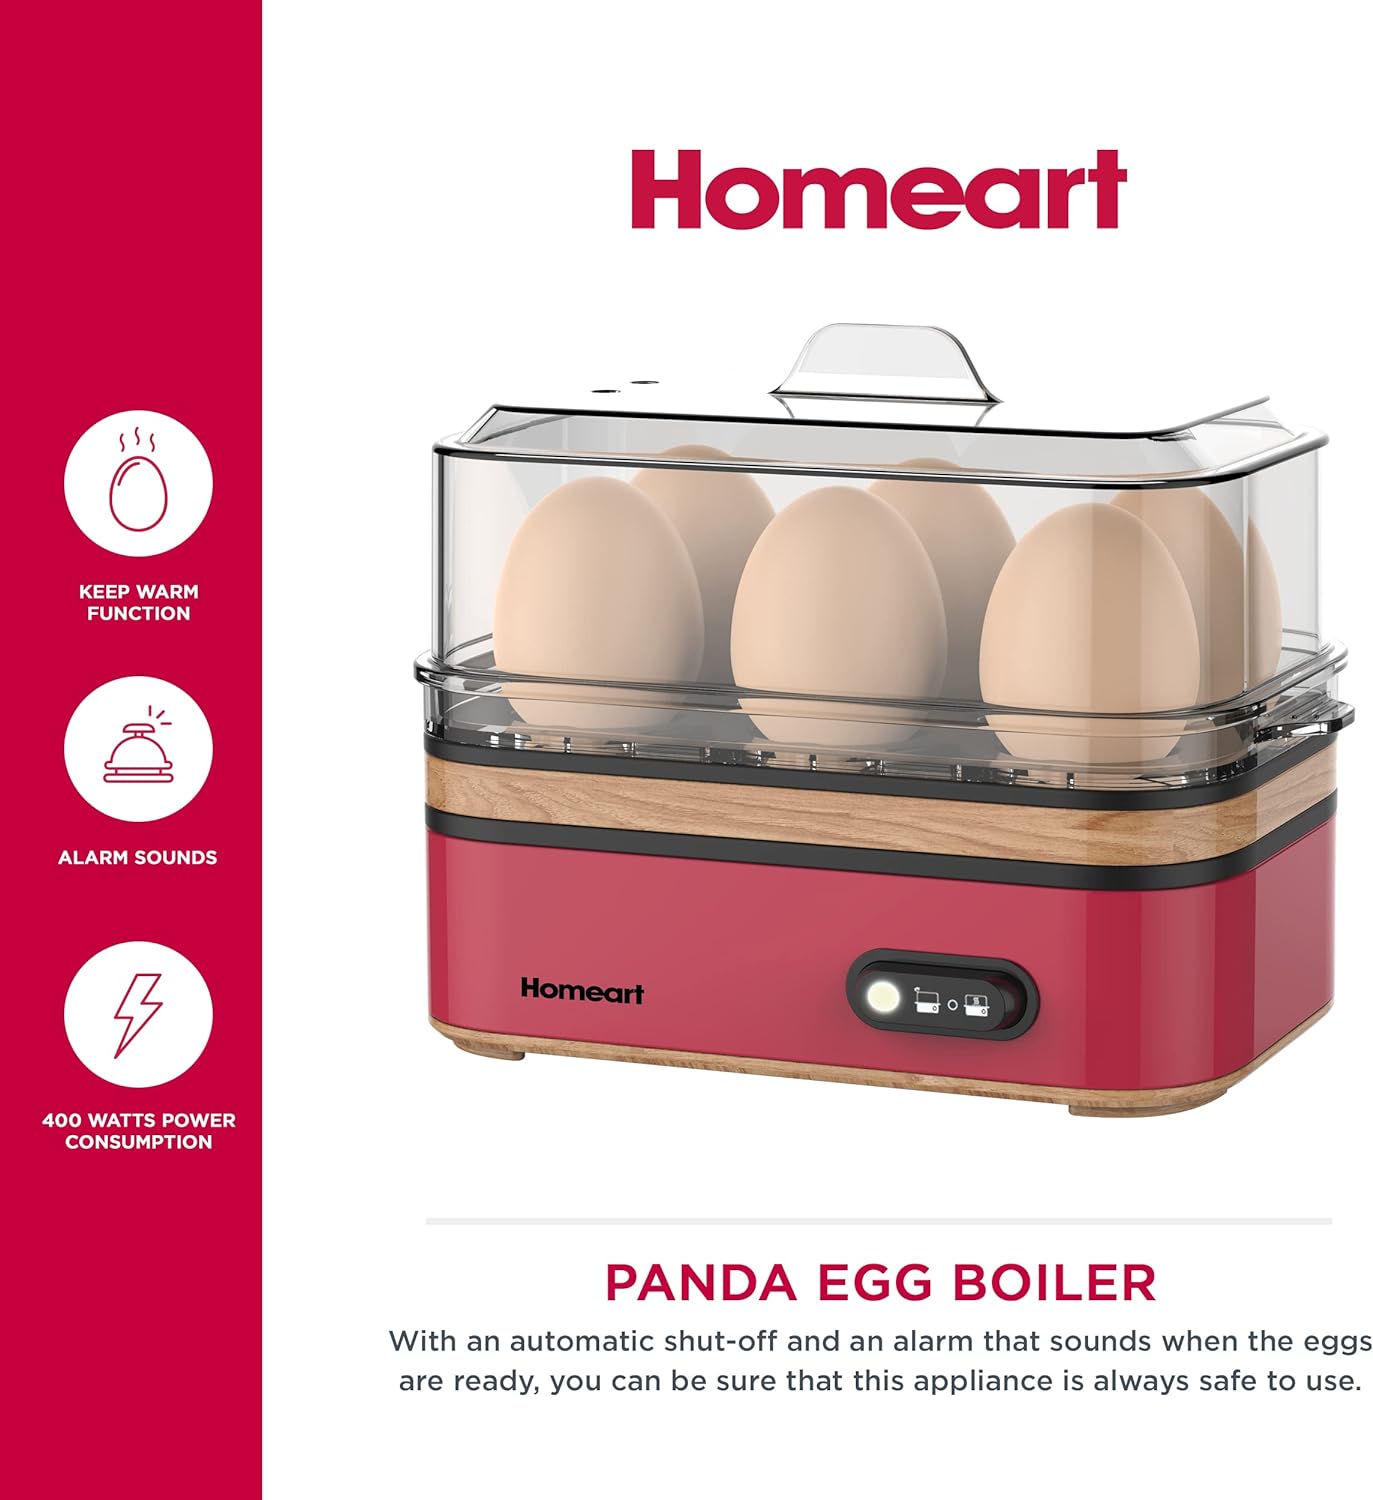 Homeart 400W Panda Egg Boiler with Wooden Detail, Red